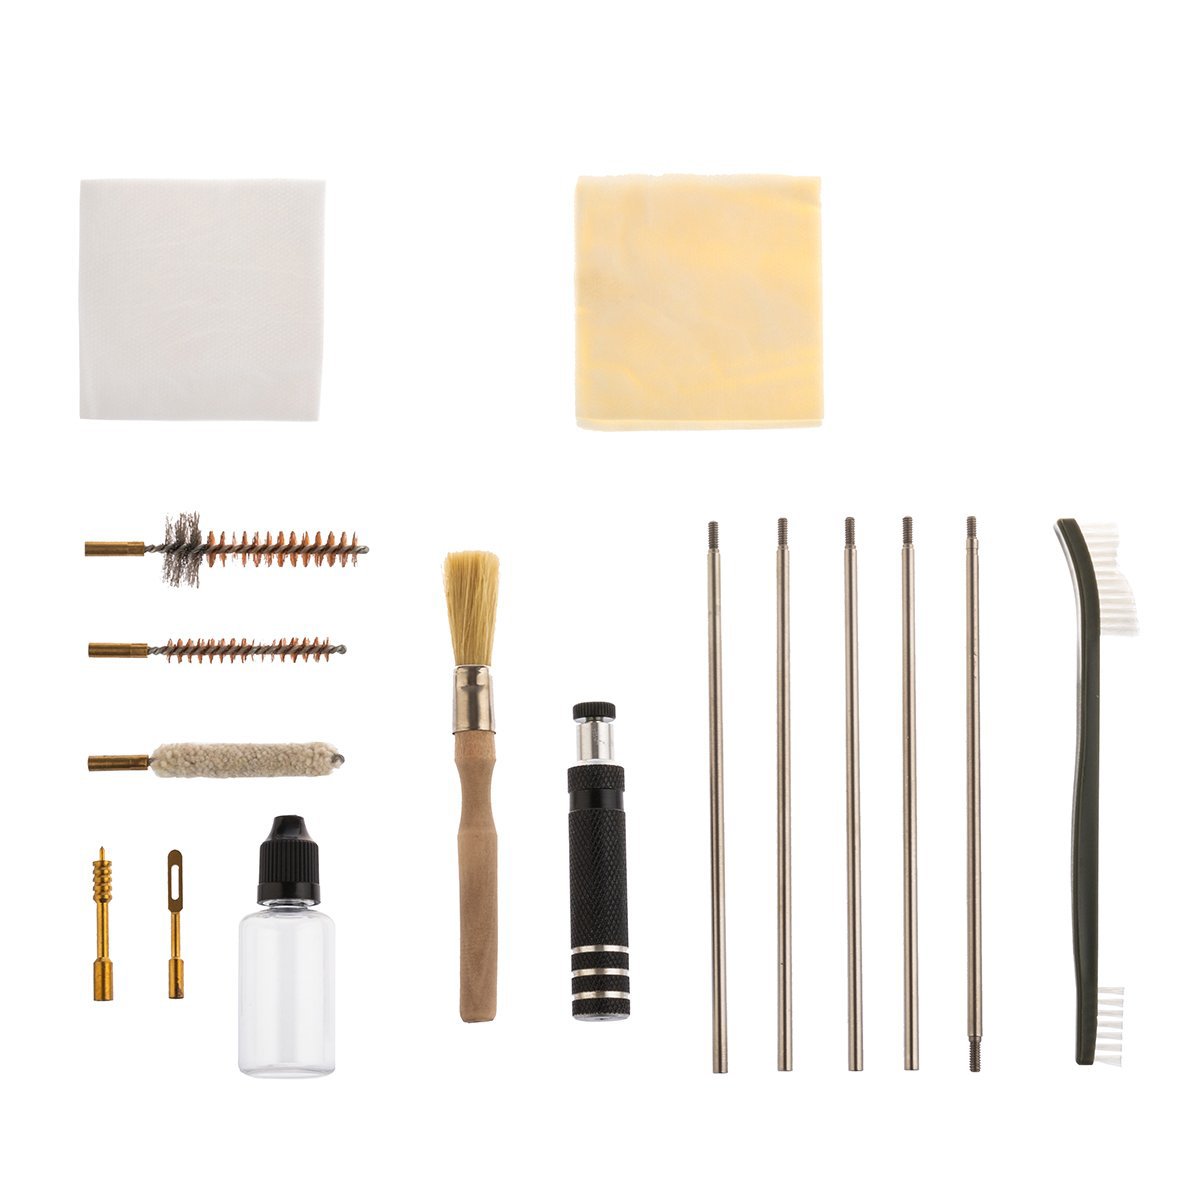 The kit includes: 2 pcs napkins, 3 models of built-up brushes for cleaning inside, oil for conservation , brush with handle, 5 pcs extension poles, double sided plastic brush, 2 pcs cleaning swab.